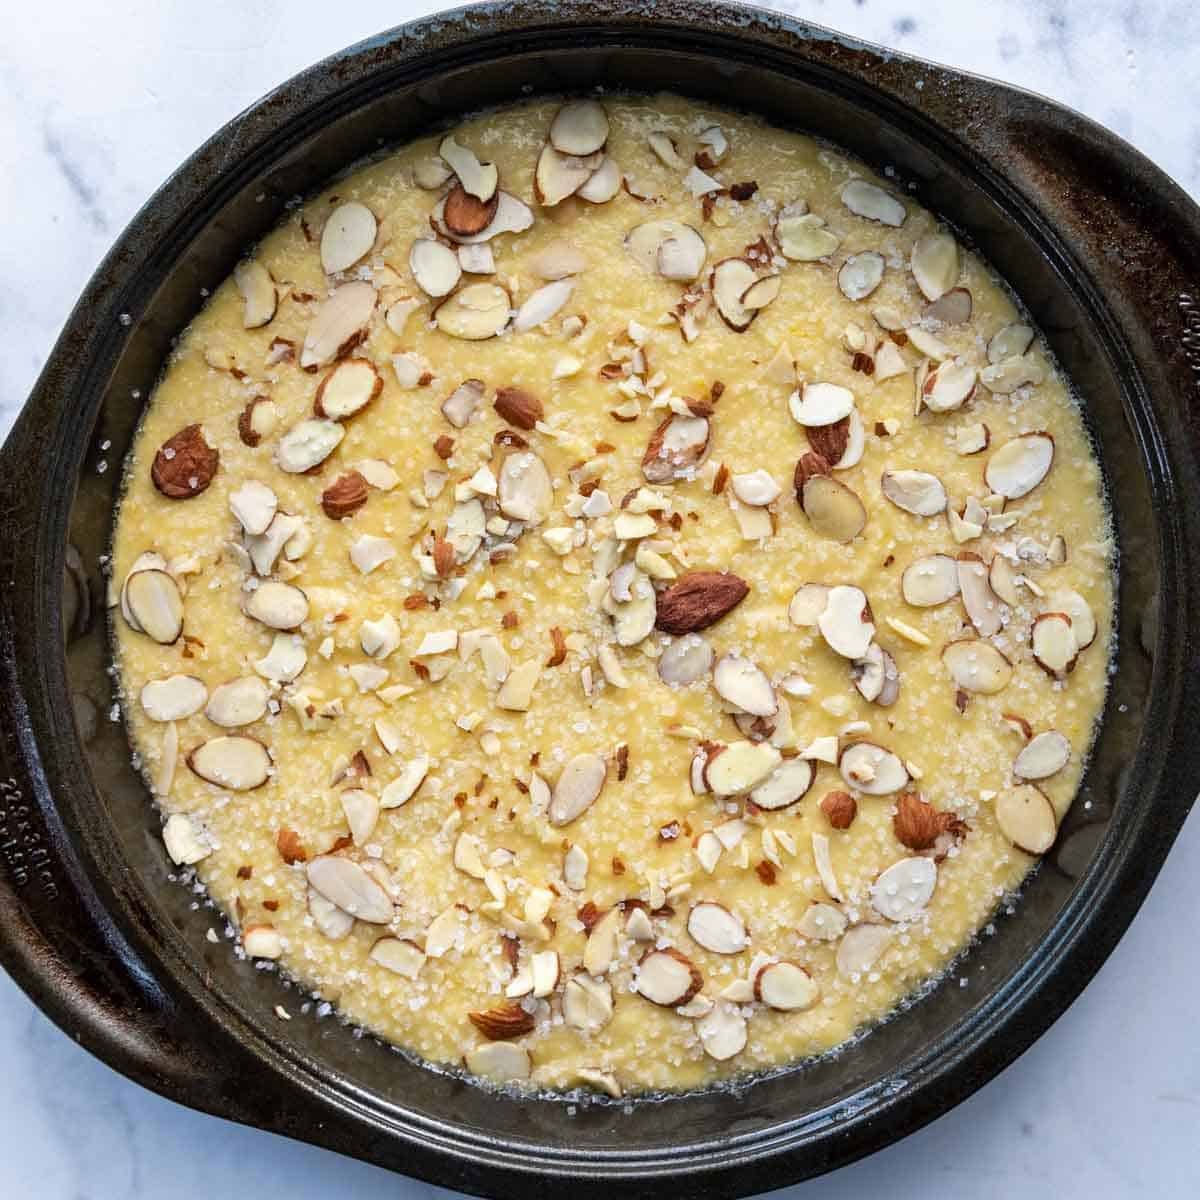 unbaked cake with sliced almonds and sugar on top.